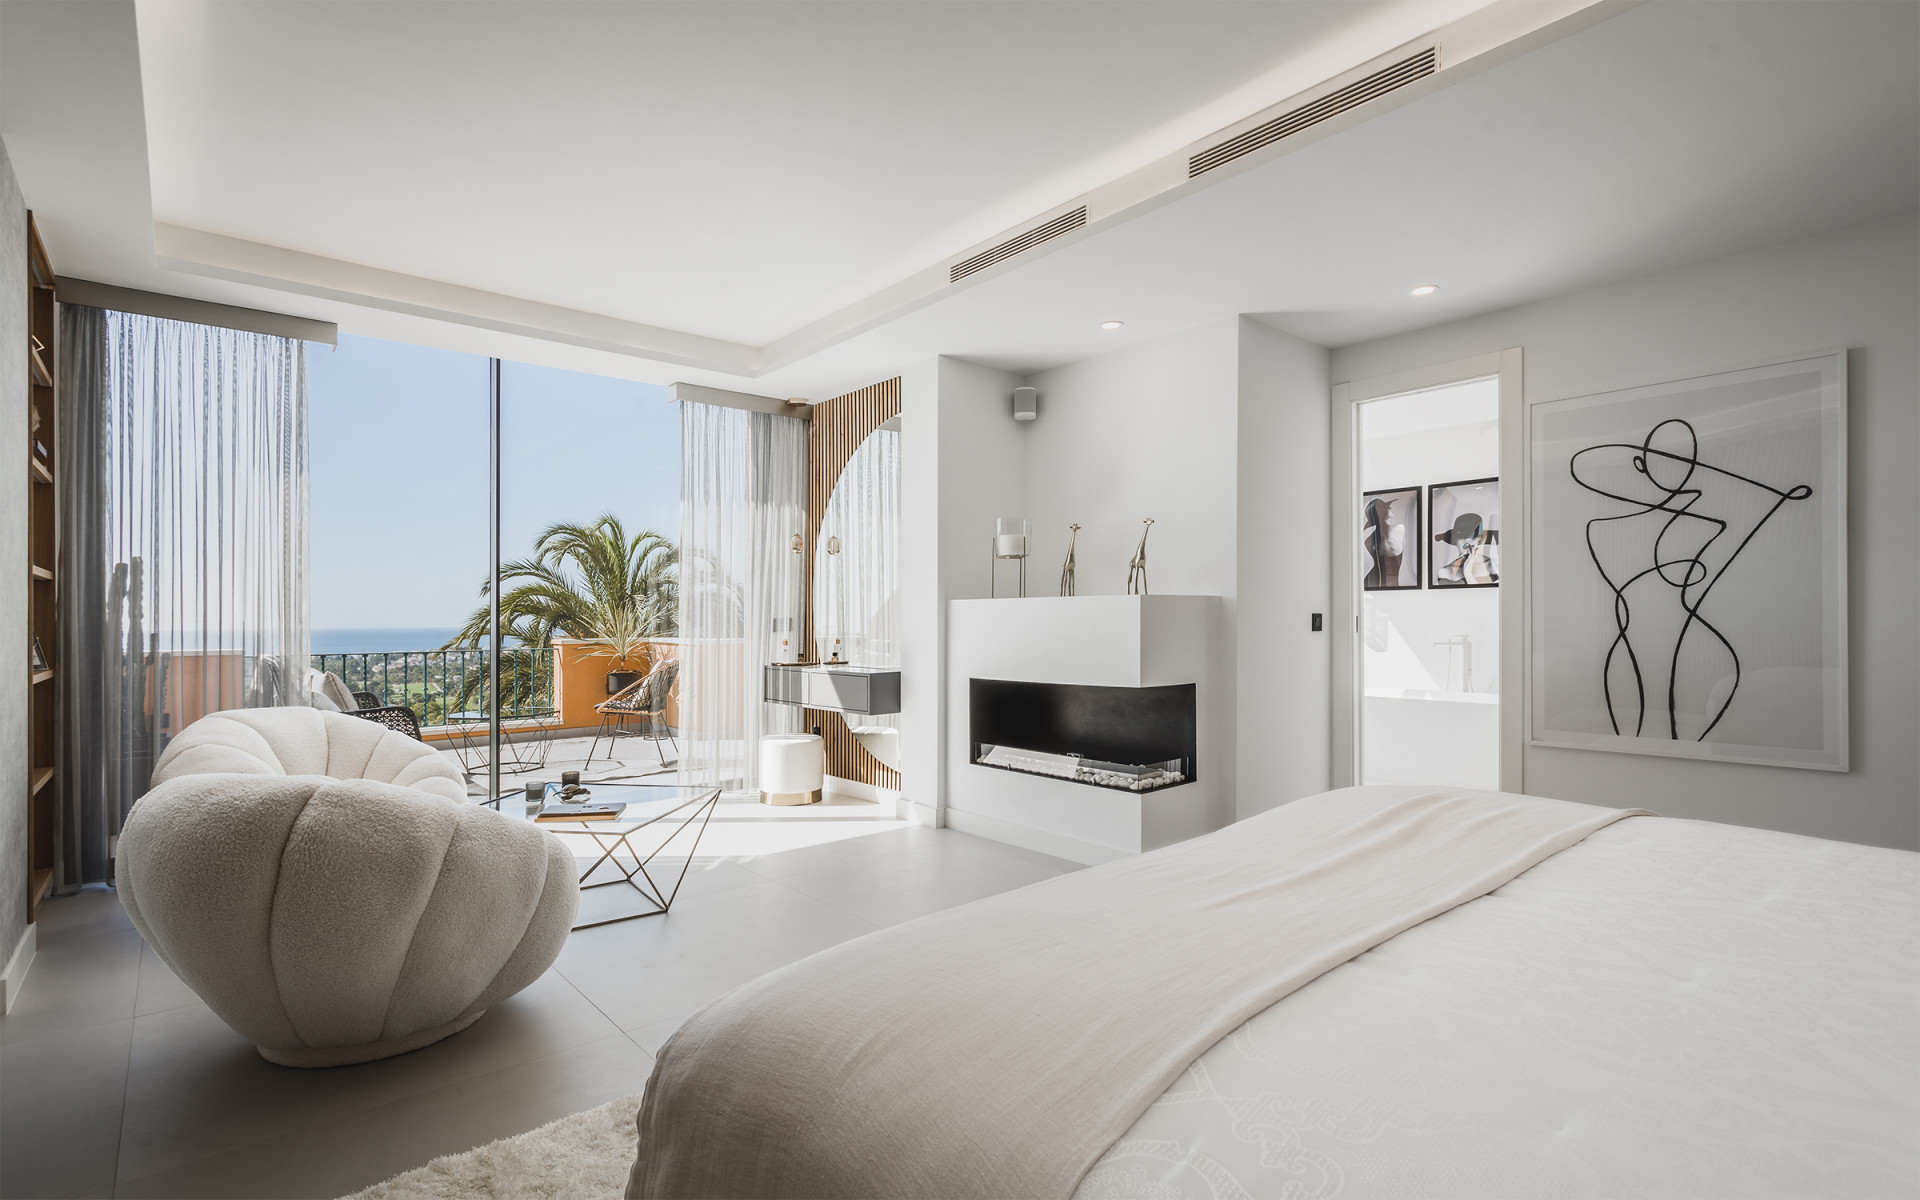 Spectacular fully renovated duplex penthouse with uninterrupted panoramic views to the sea